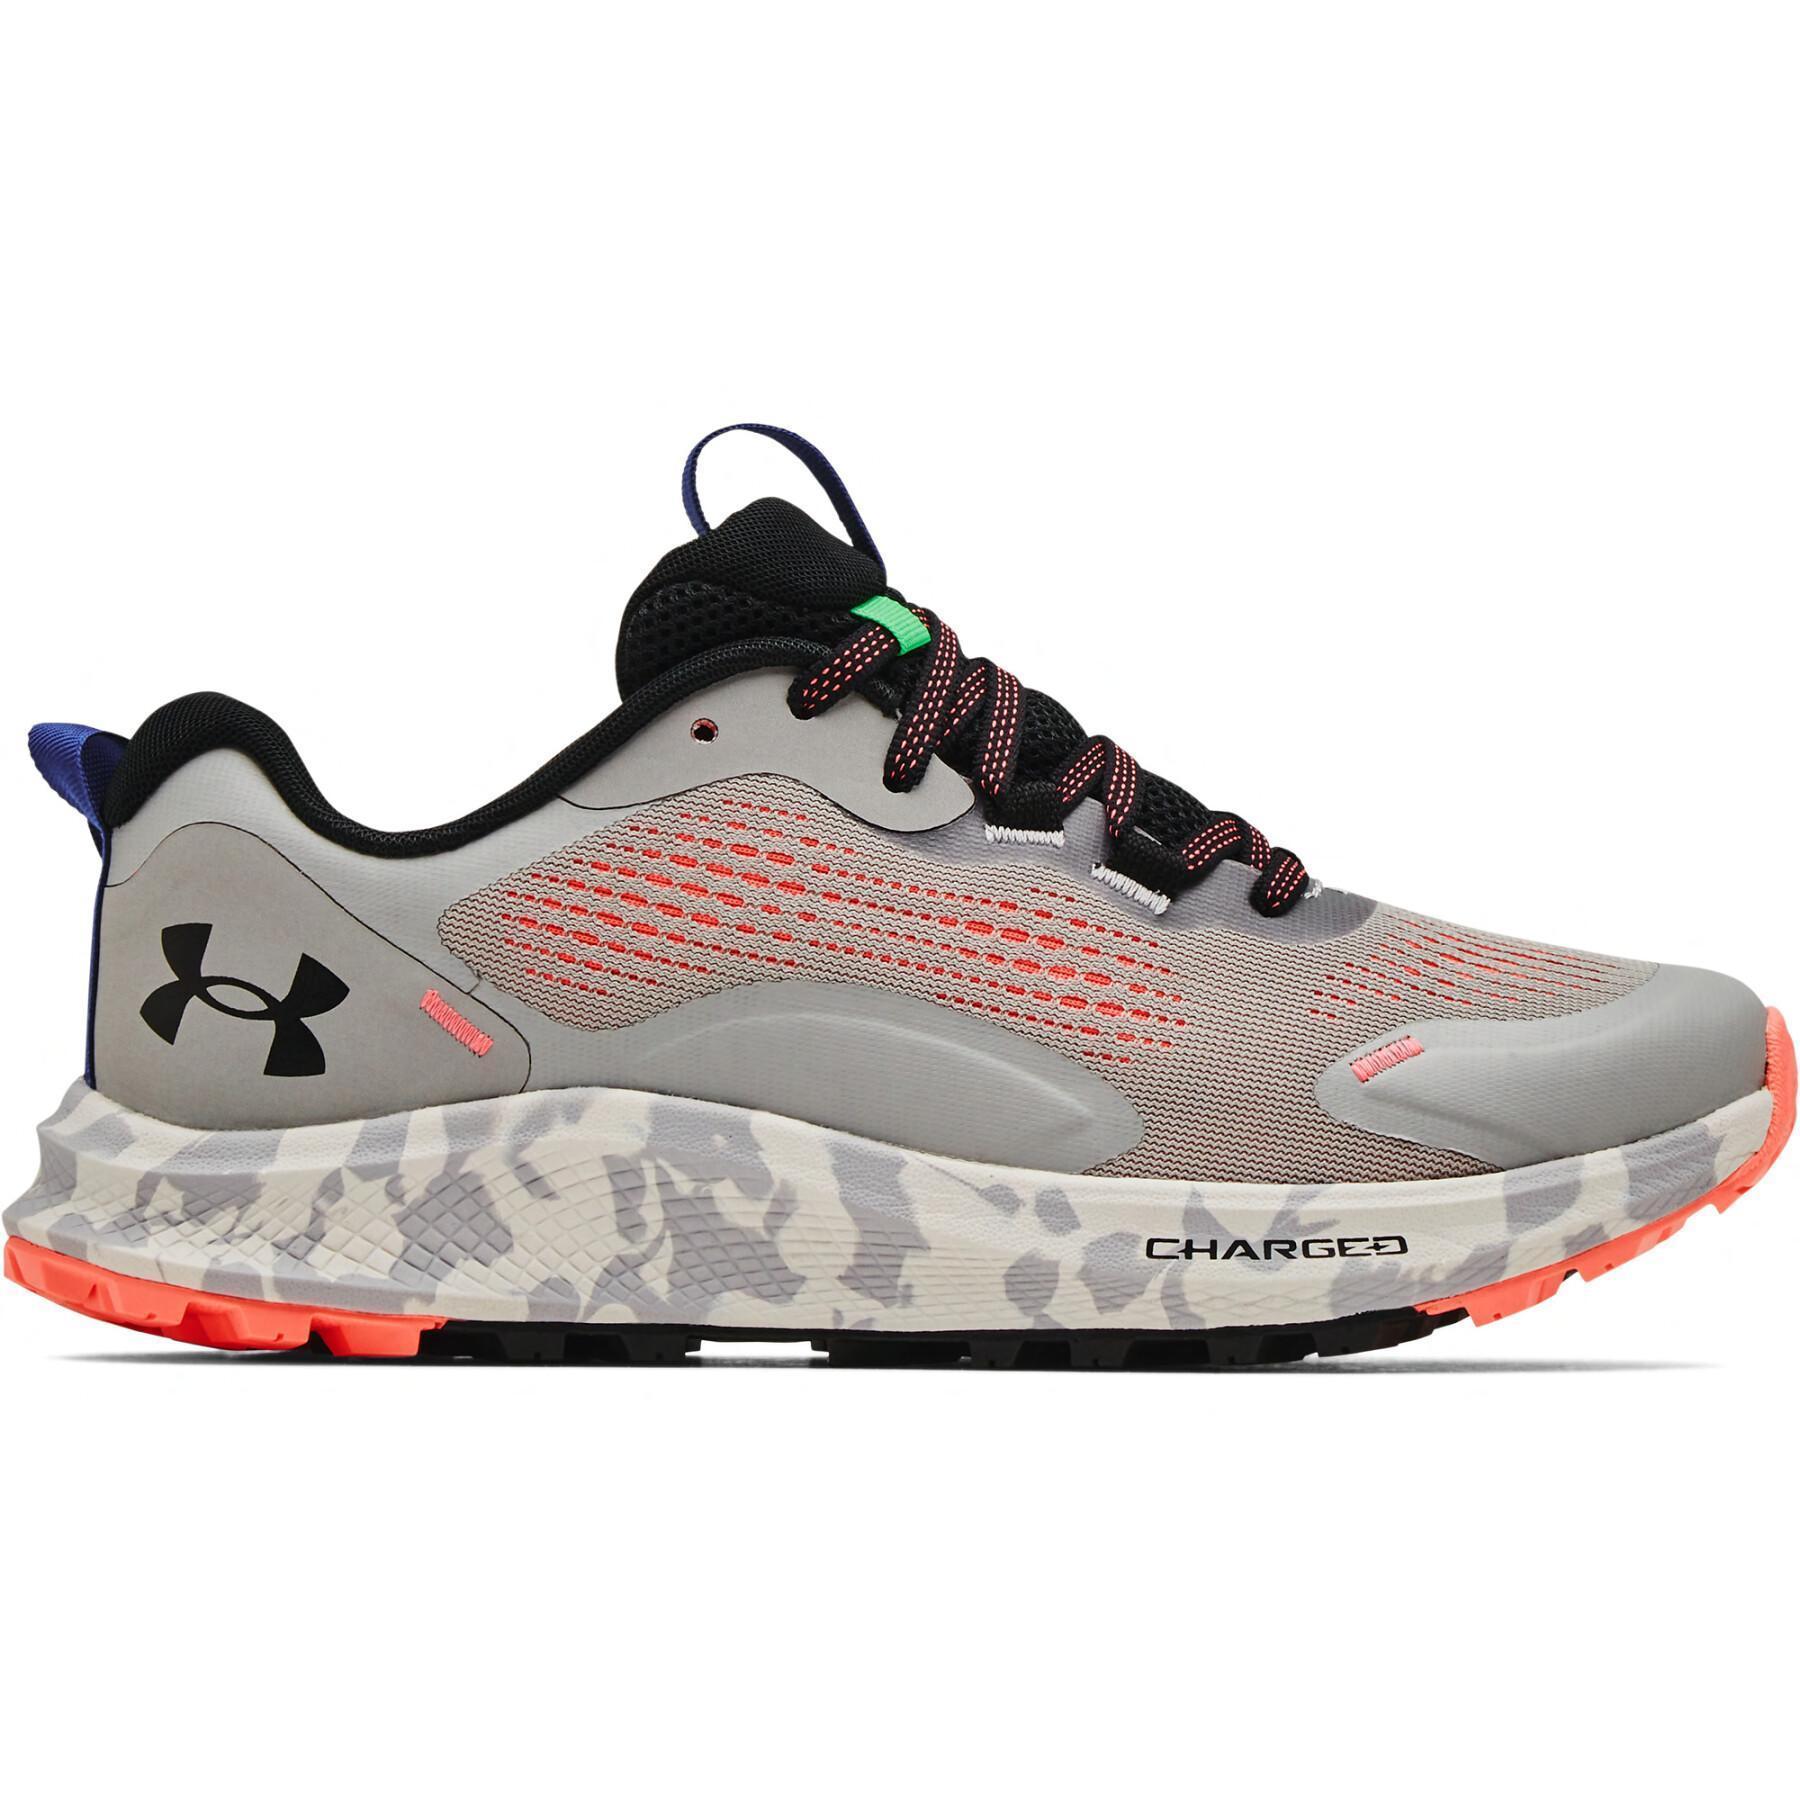 Chaussures de running femme Under Armour Charged Bandit TR2